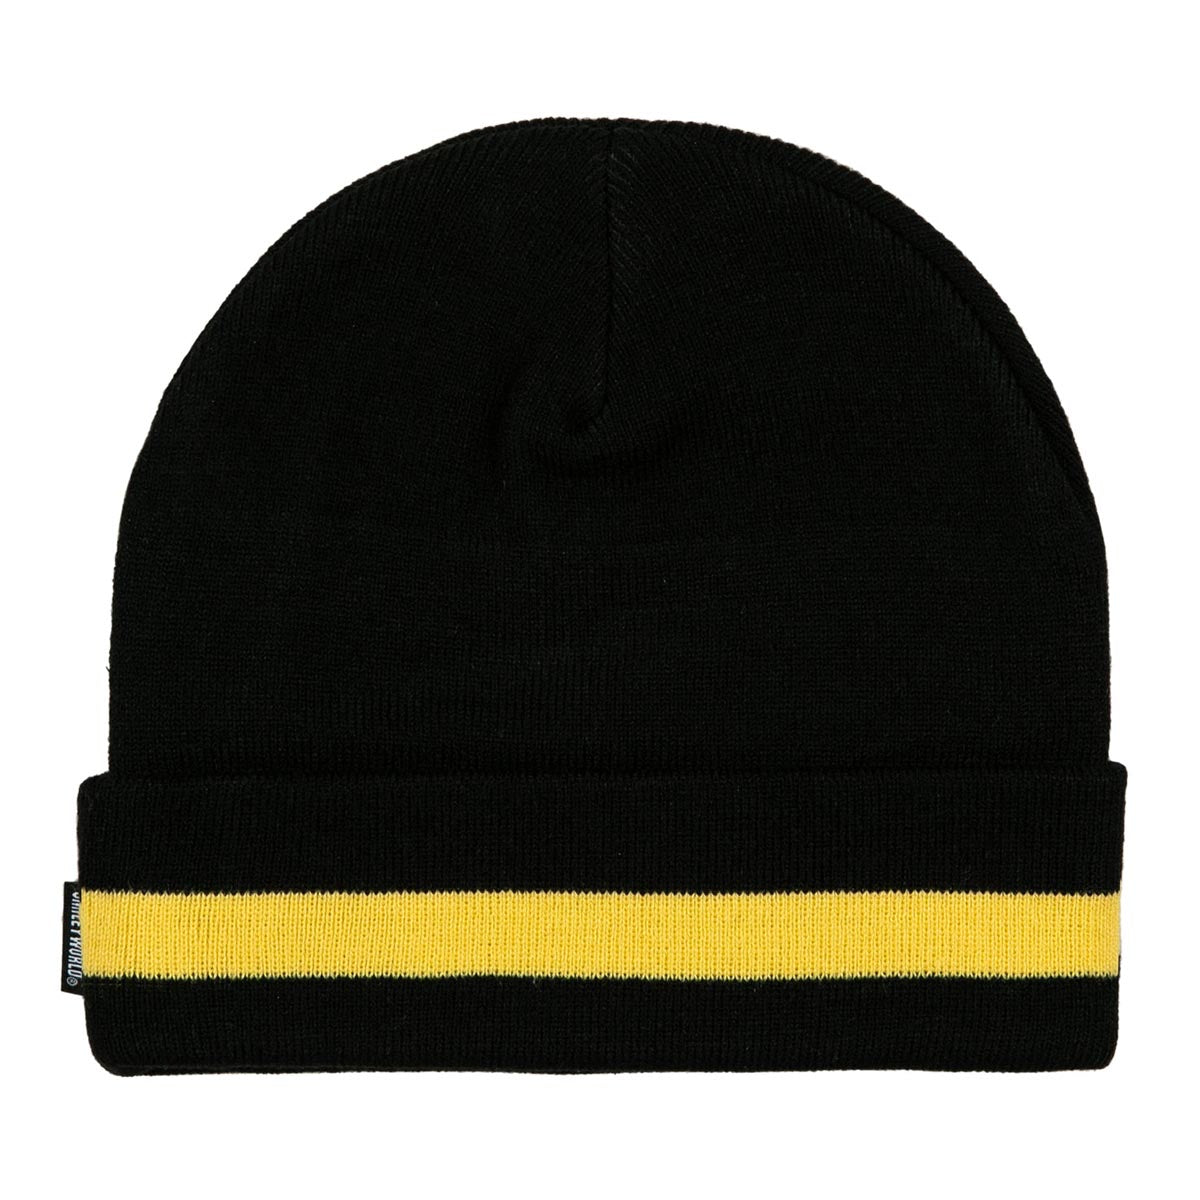 Grizzly x Smiley World School Of Happines Beanie - Black image 2